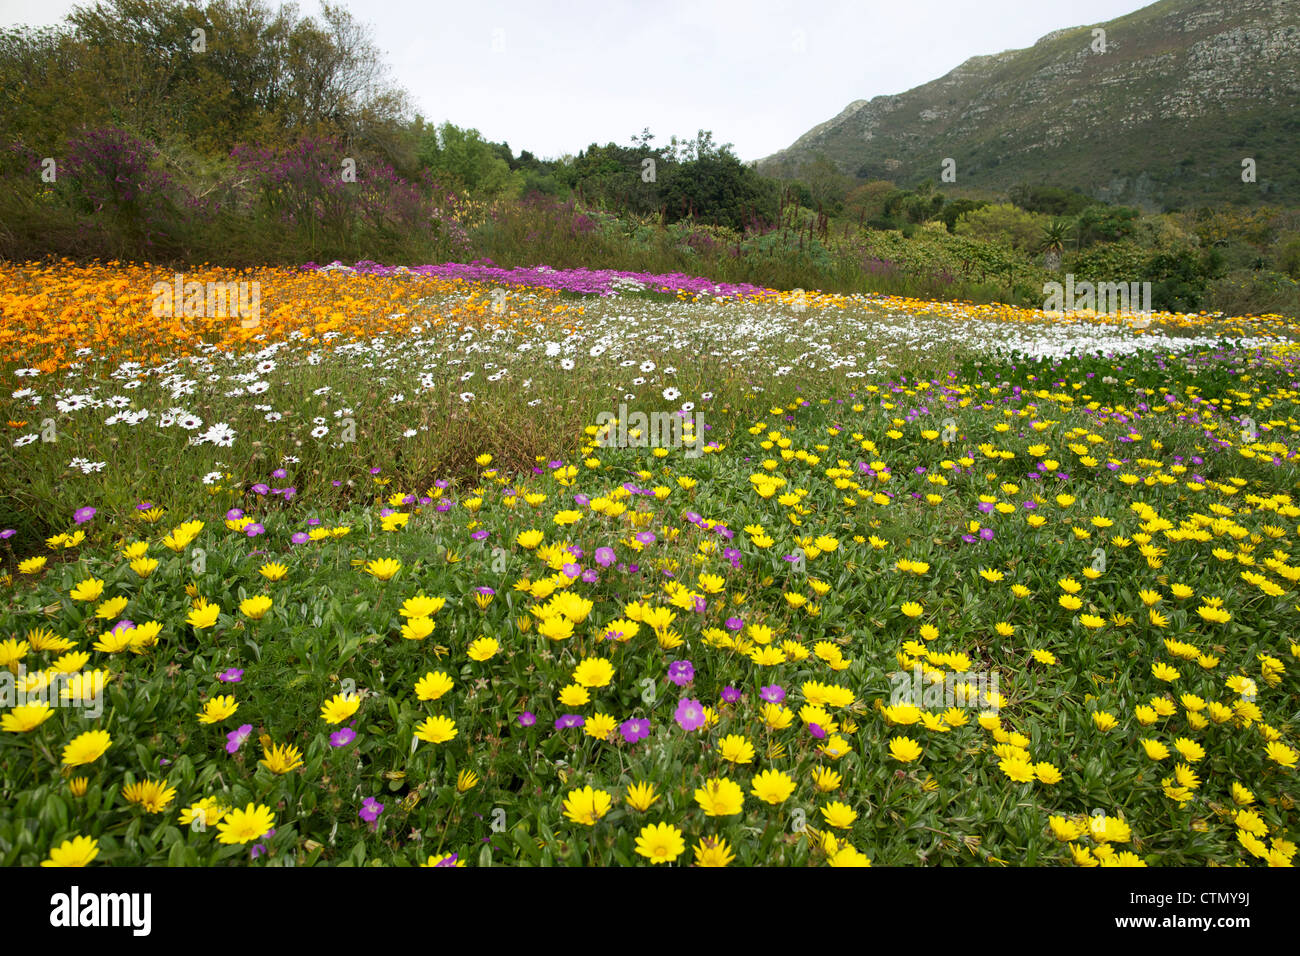 Meadow with daisies, Kirstenbosch, Cape Town, Western Cape, South Africa Stock Photo